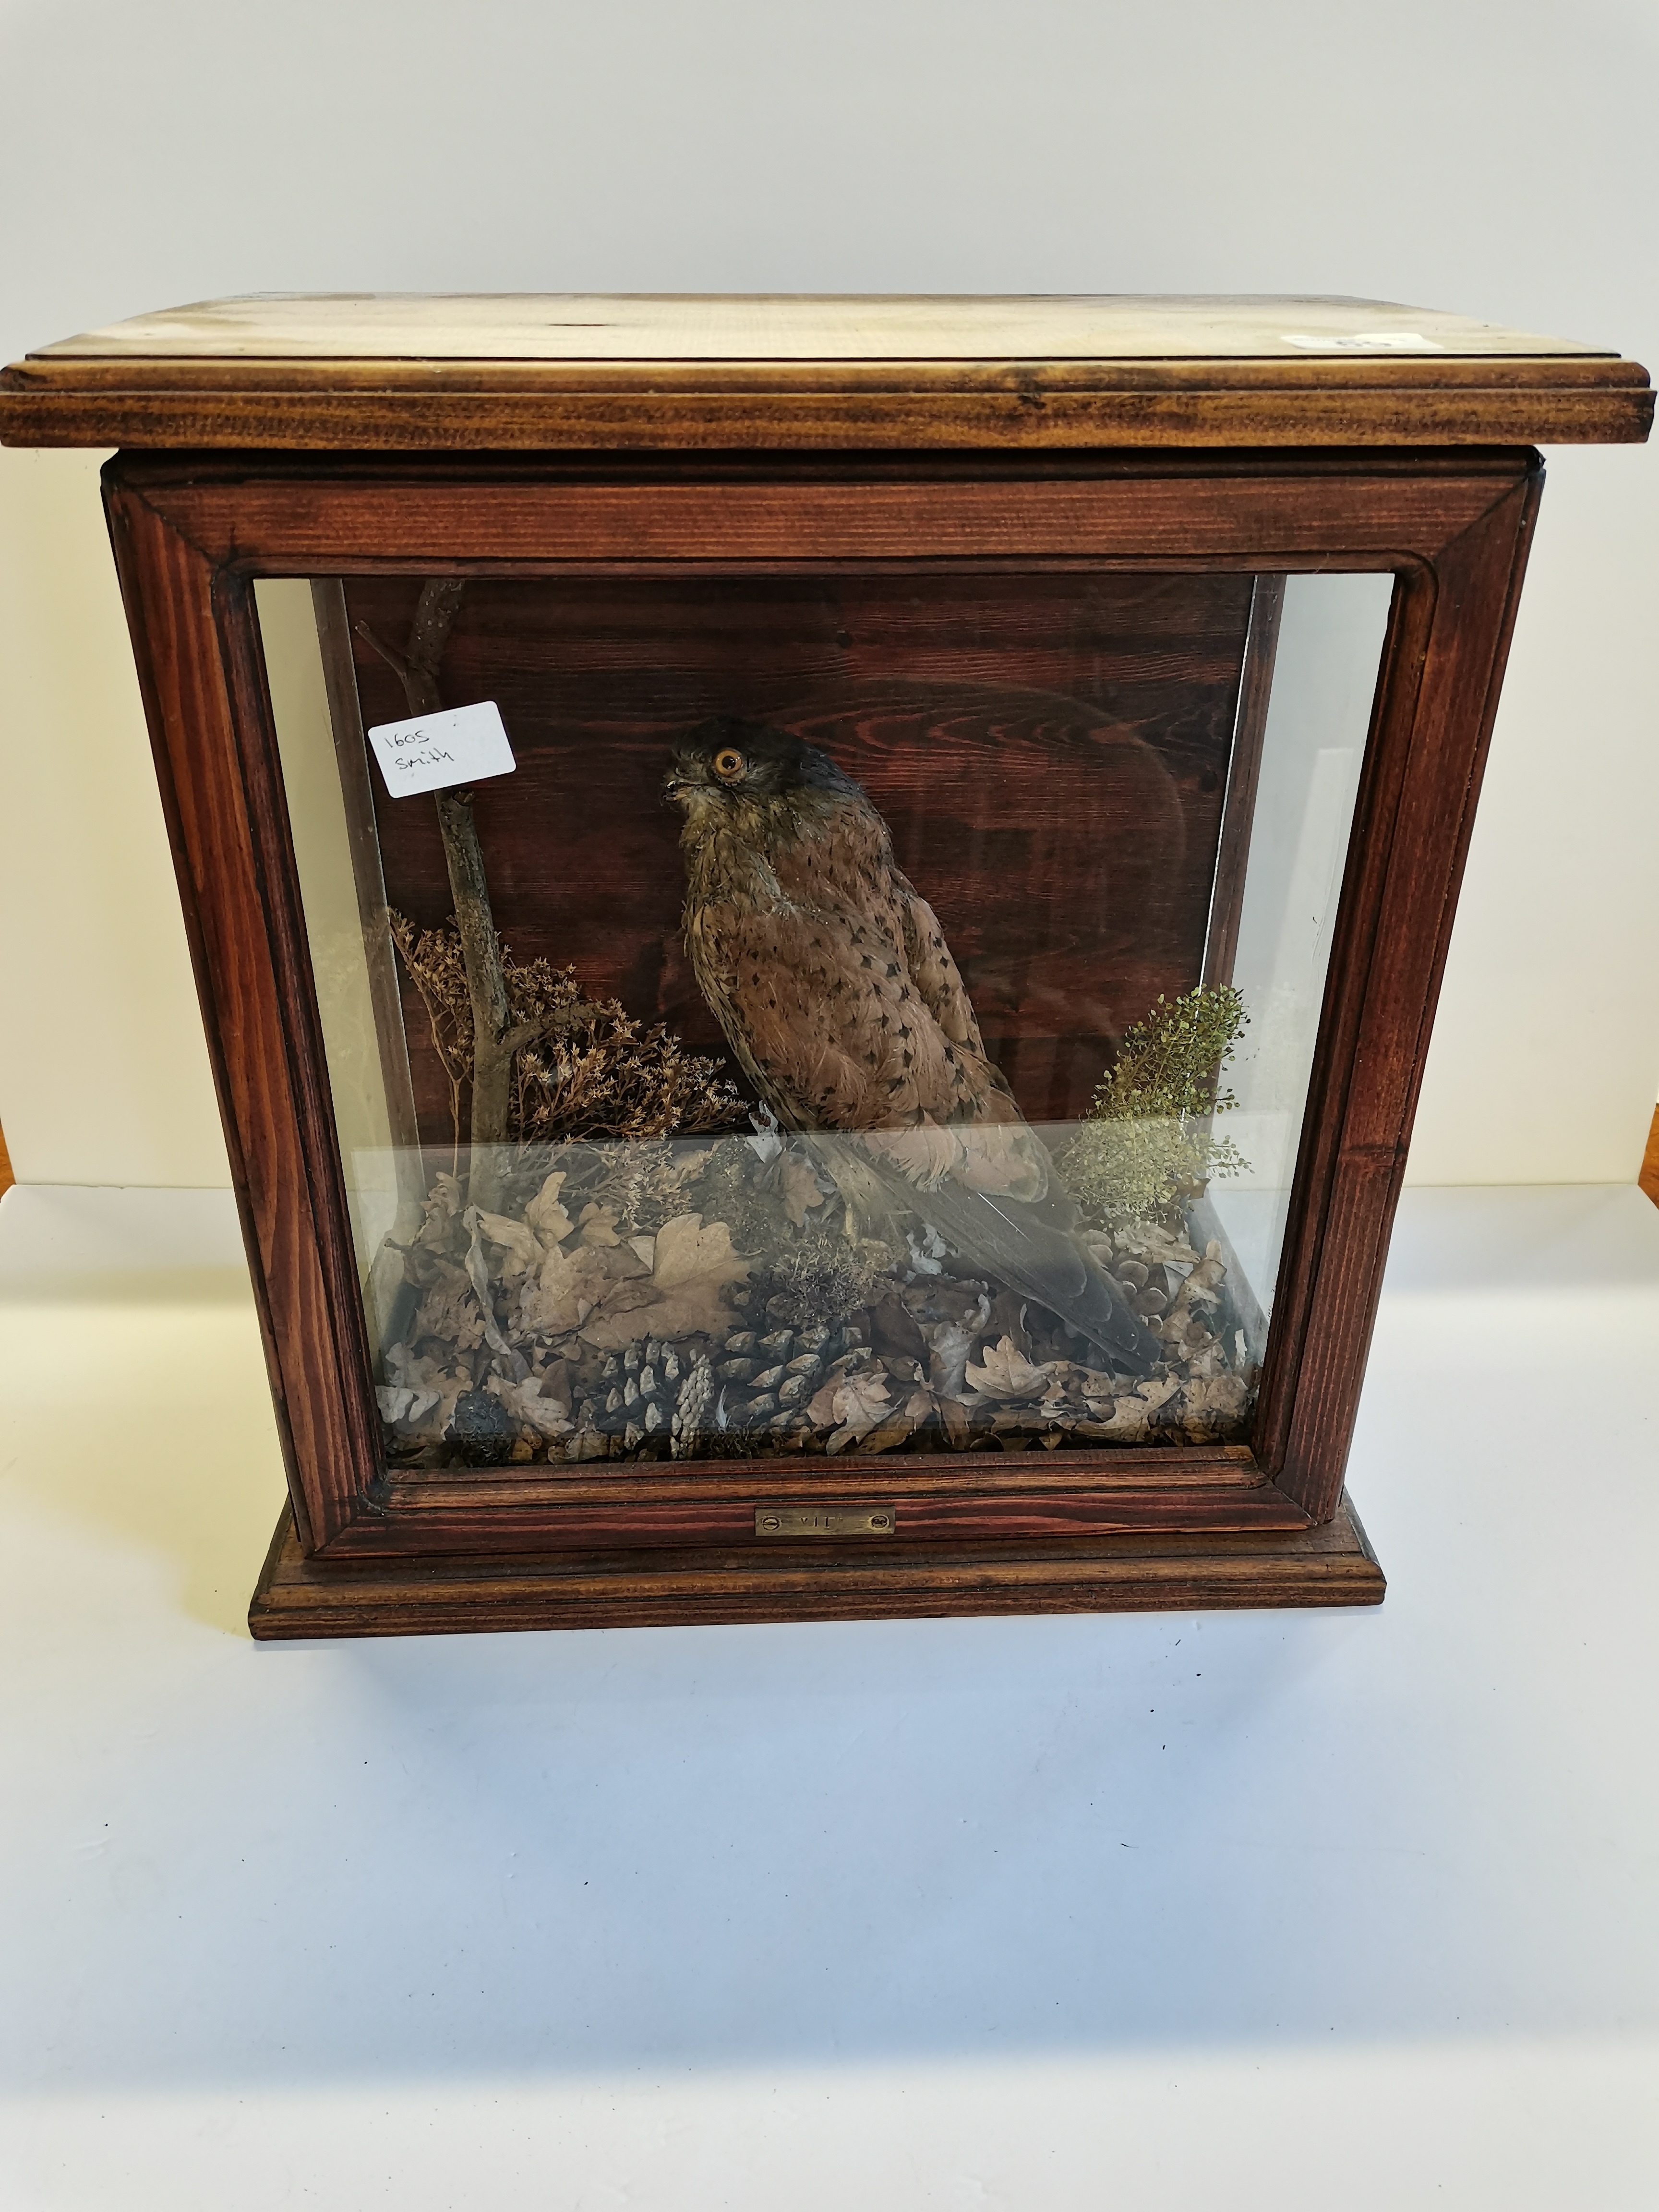 Taxidermy bird in glass case - Image 2 of 2